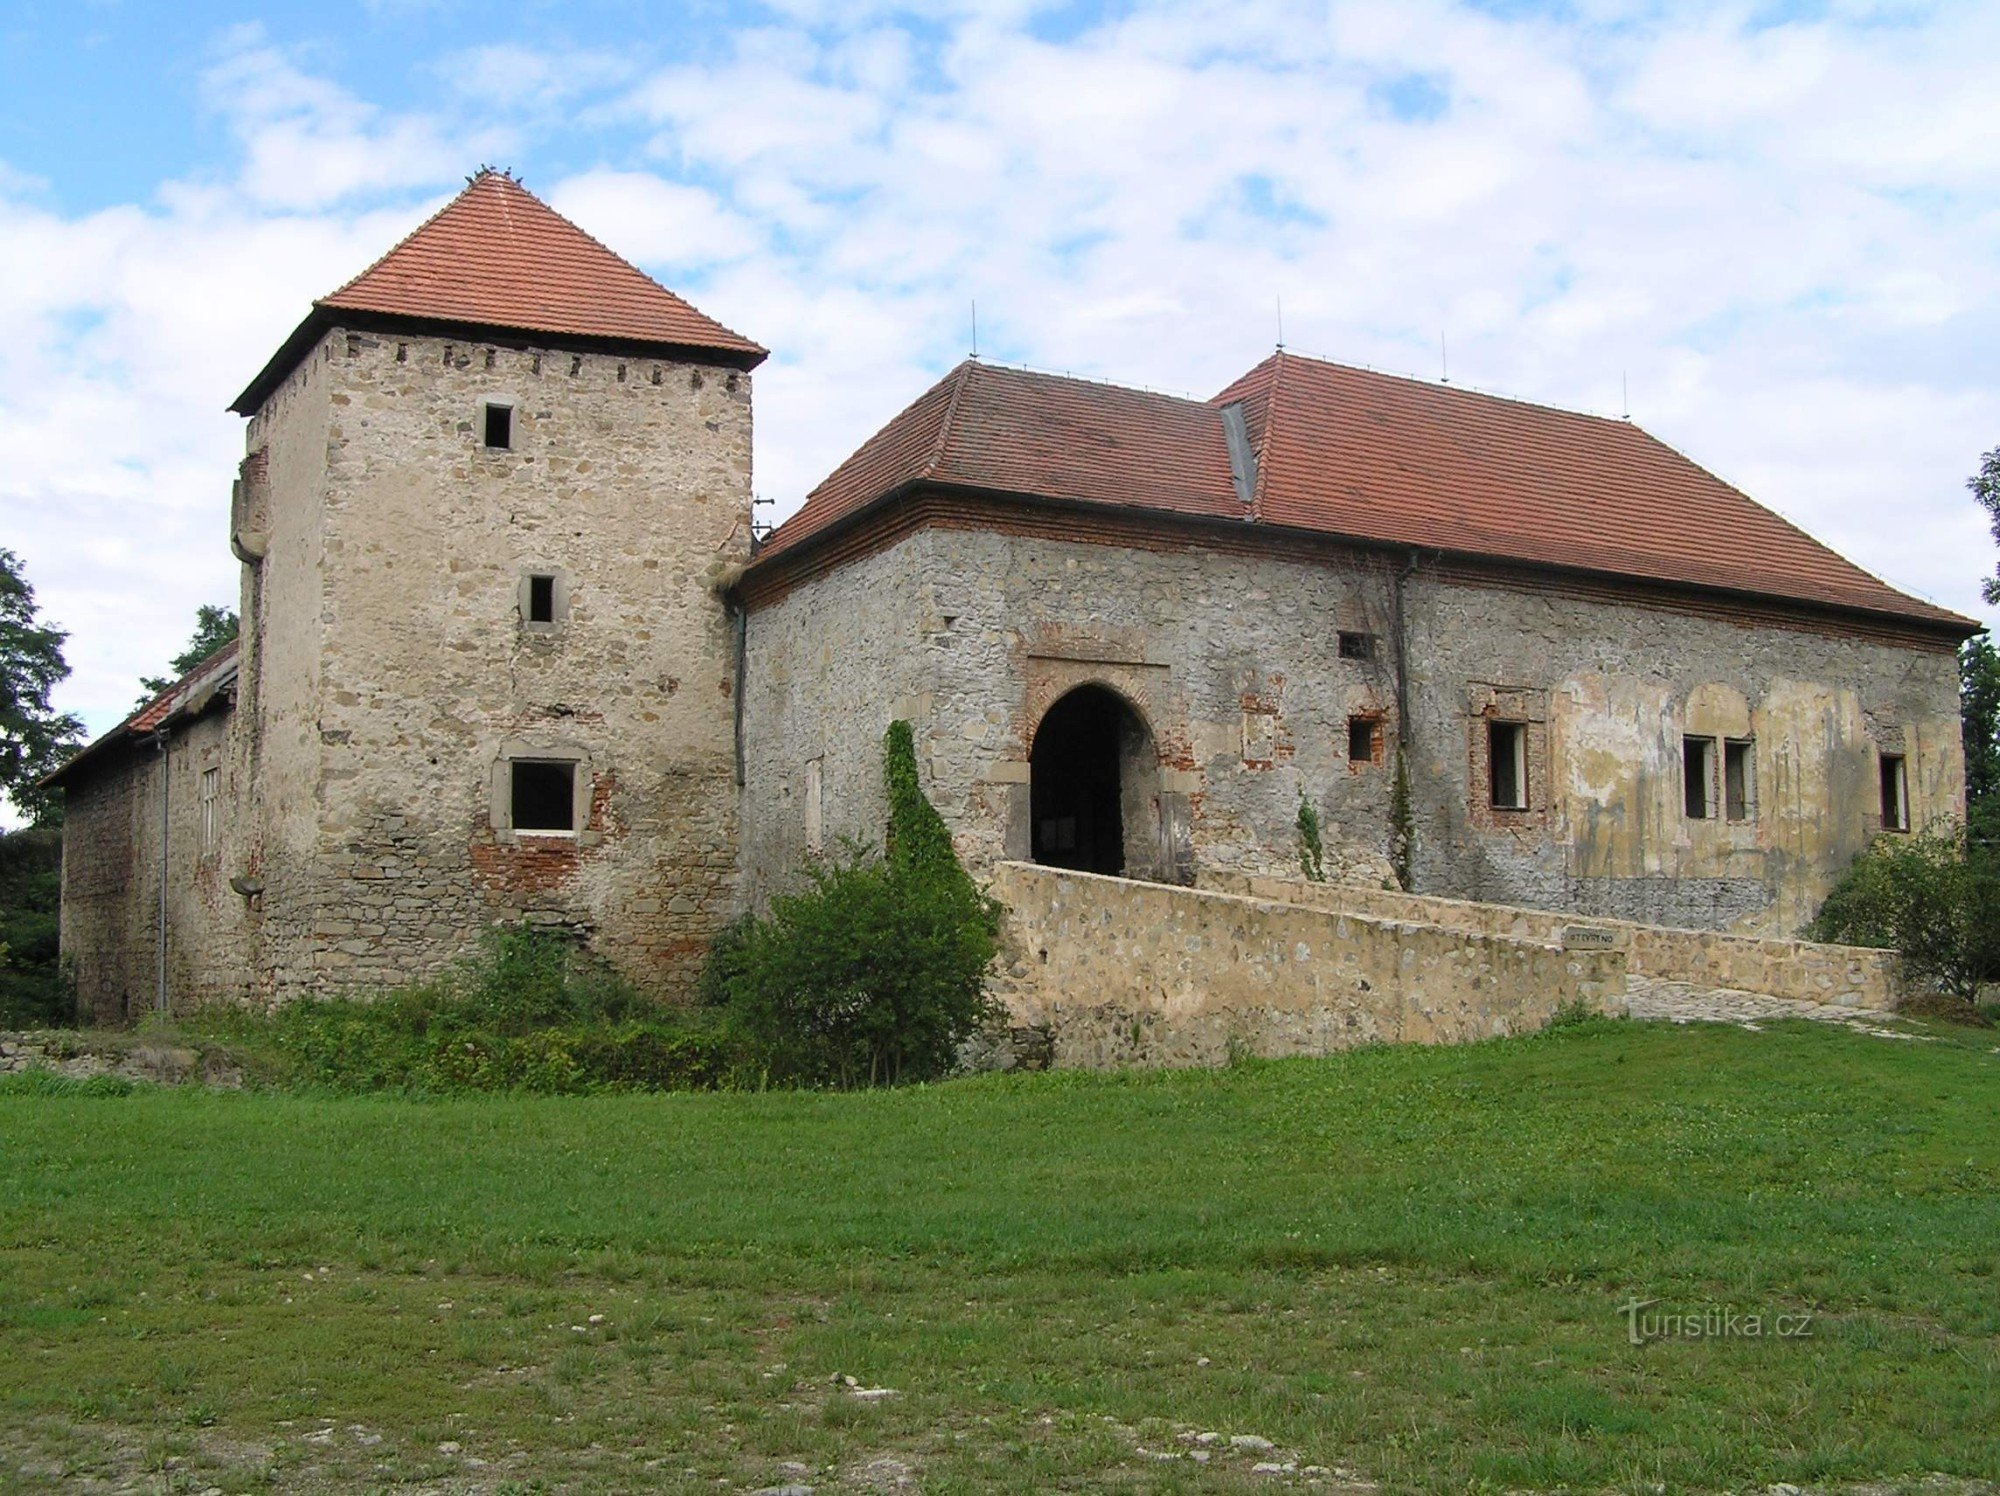 The upper fortress of Kestřany